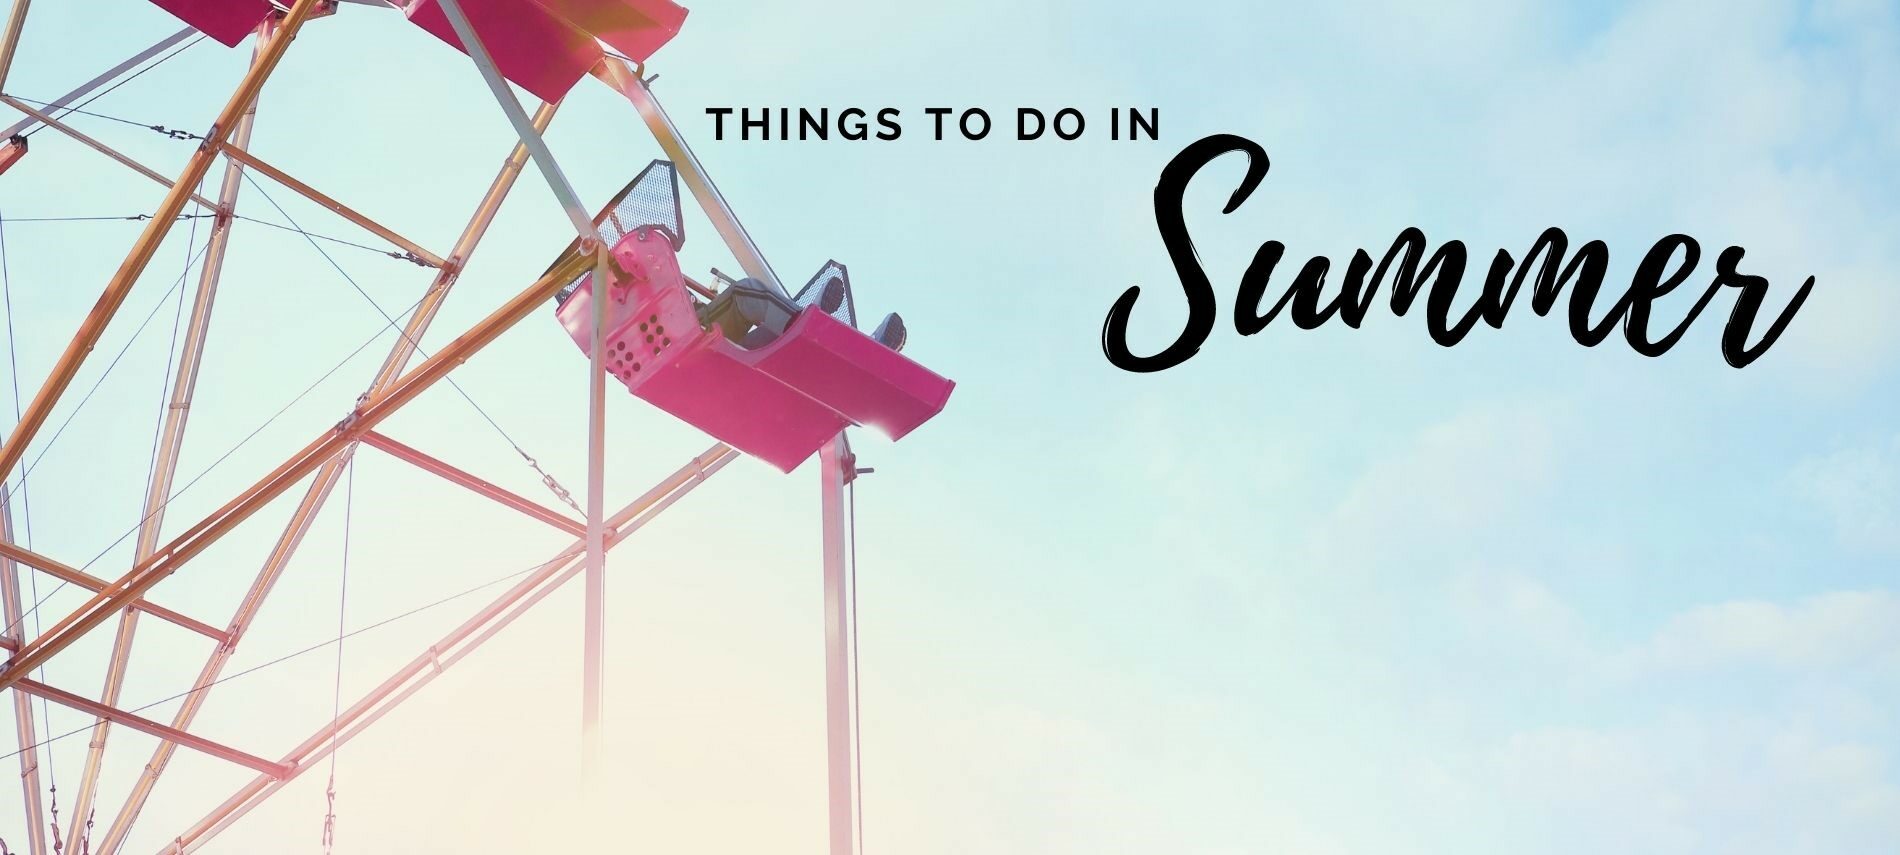 Part of ferris wheel ride with text “Things to do in Summer”